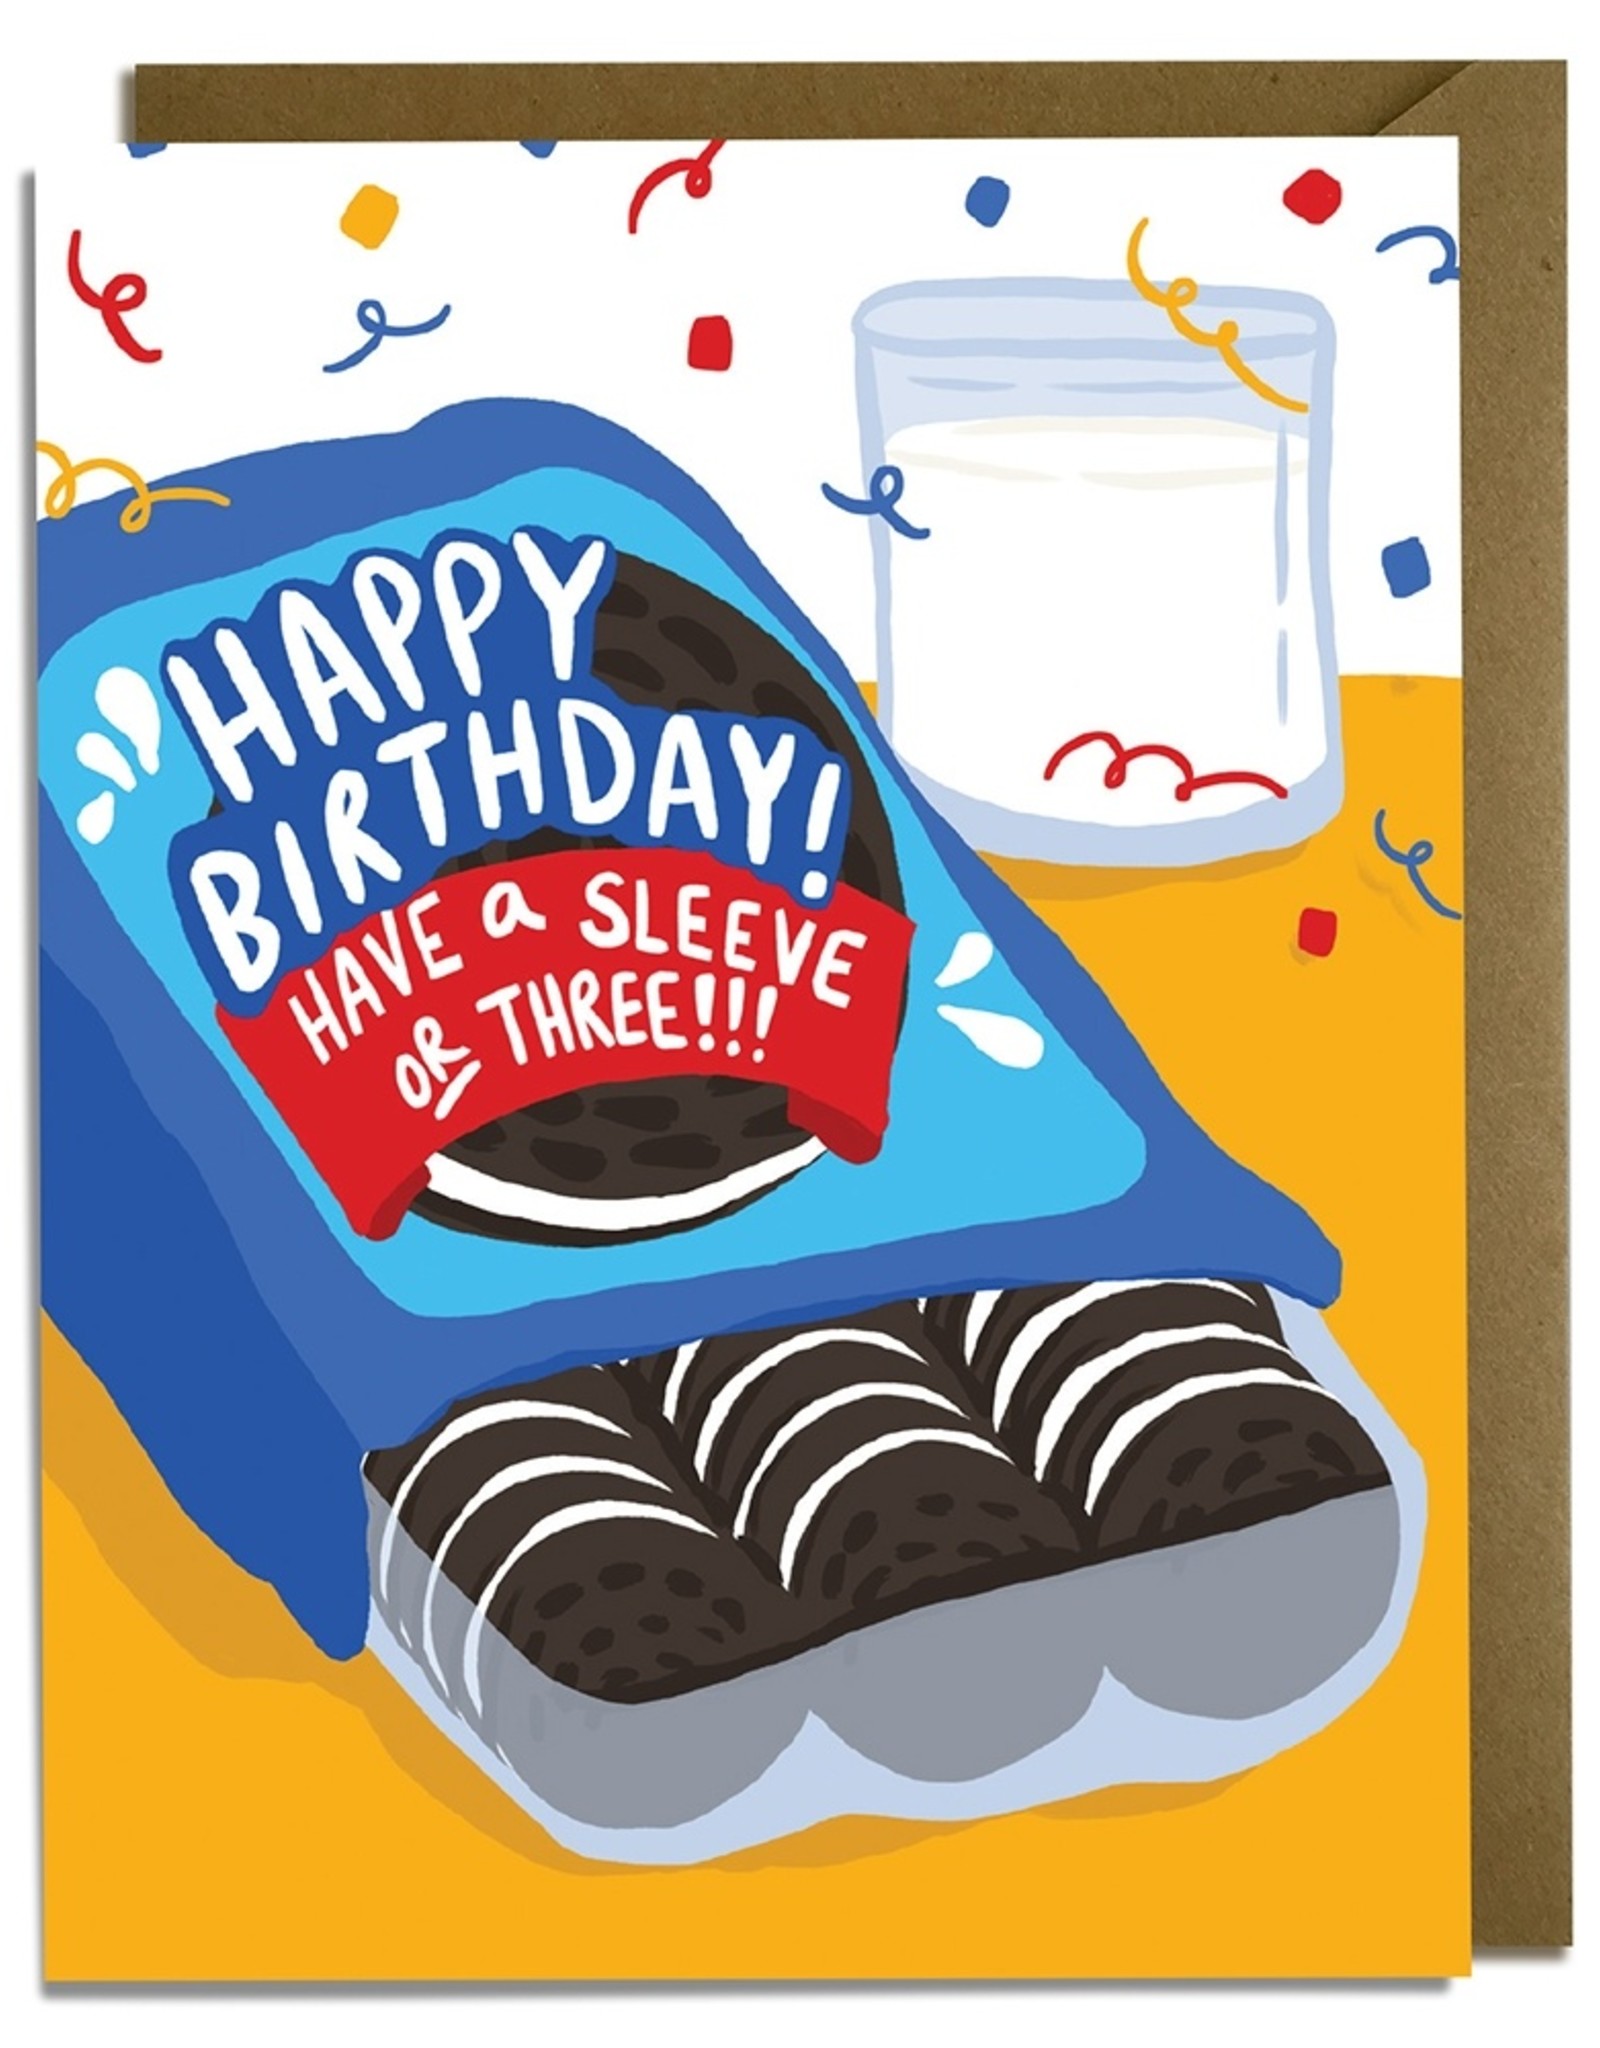 Kat French Card - Birthday: Cookies